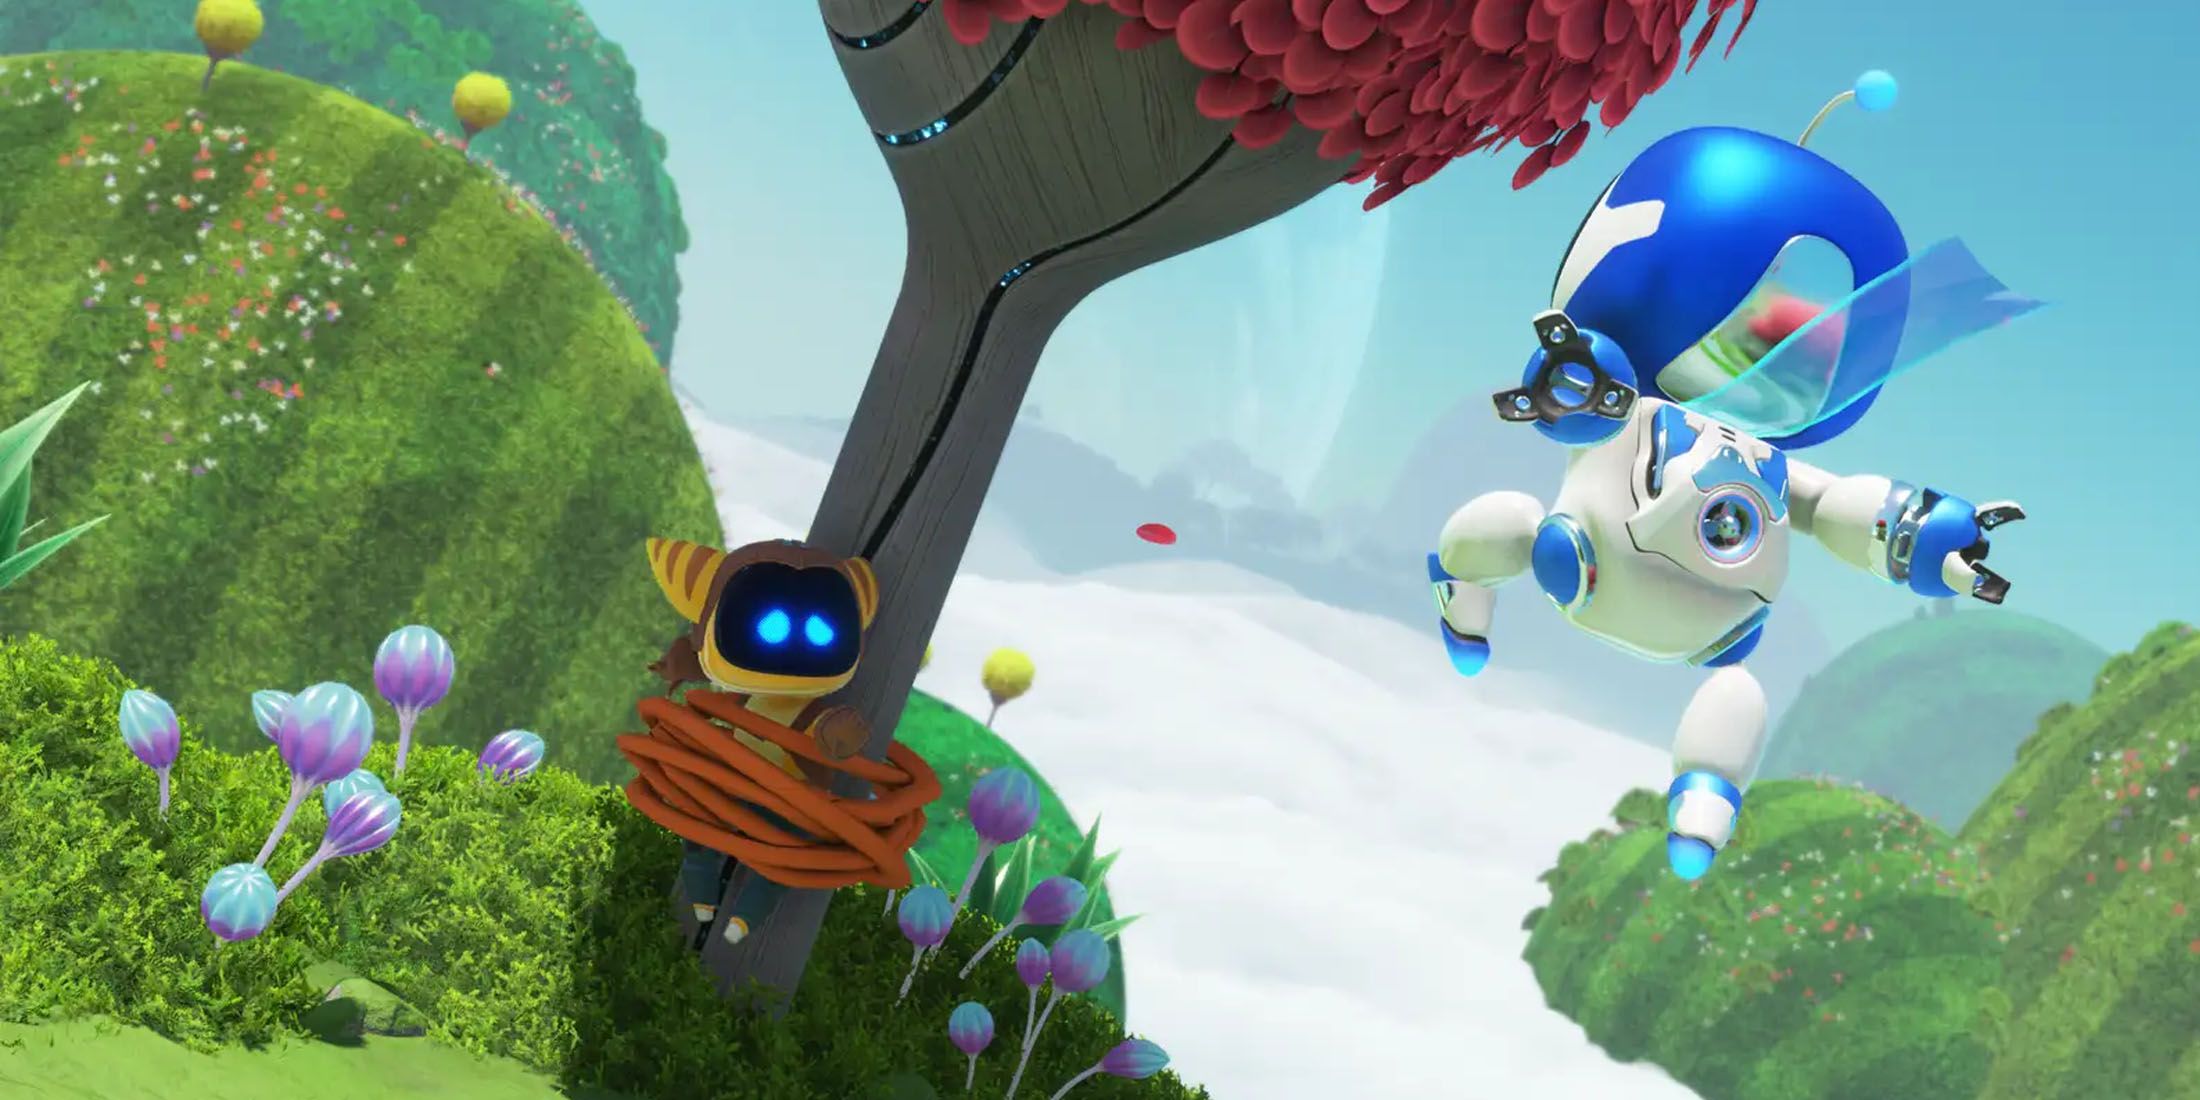 A screenshot of Astro Bot rescuing a robot that looks like Ratchet from Ratchet and Clank.